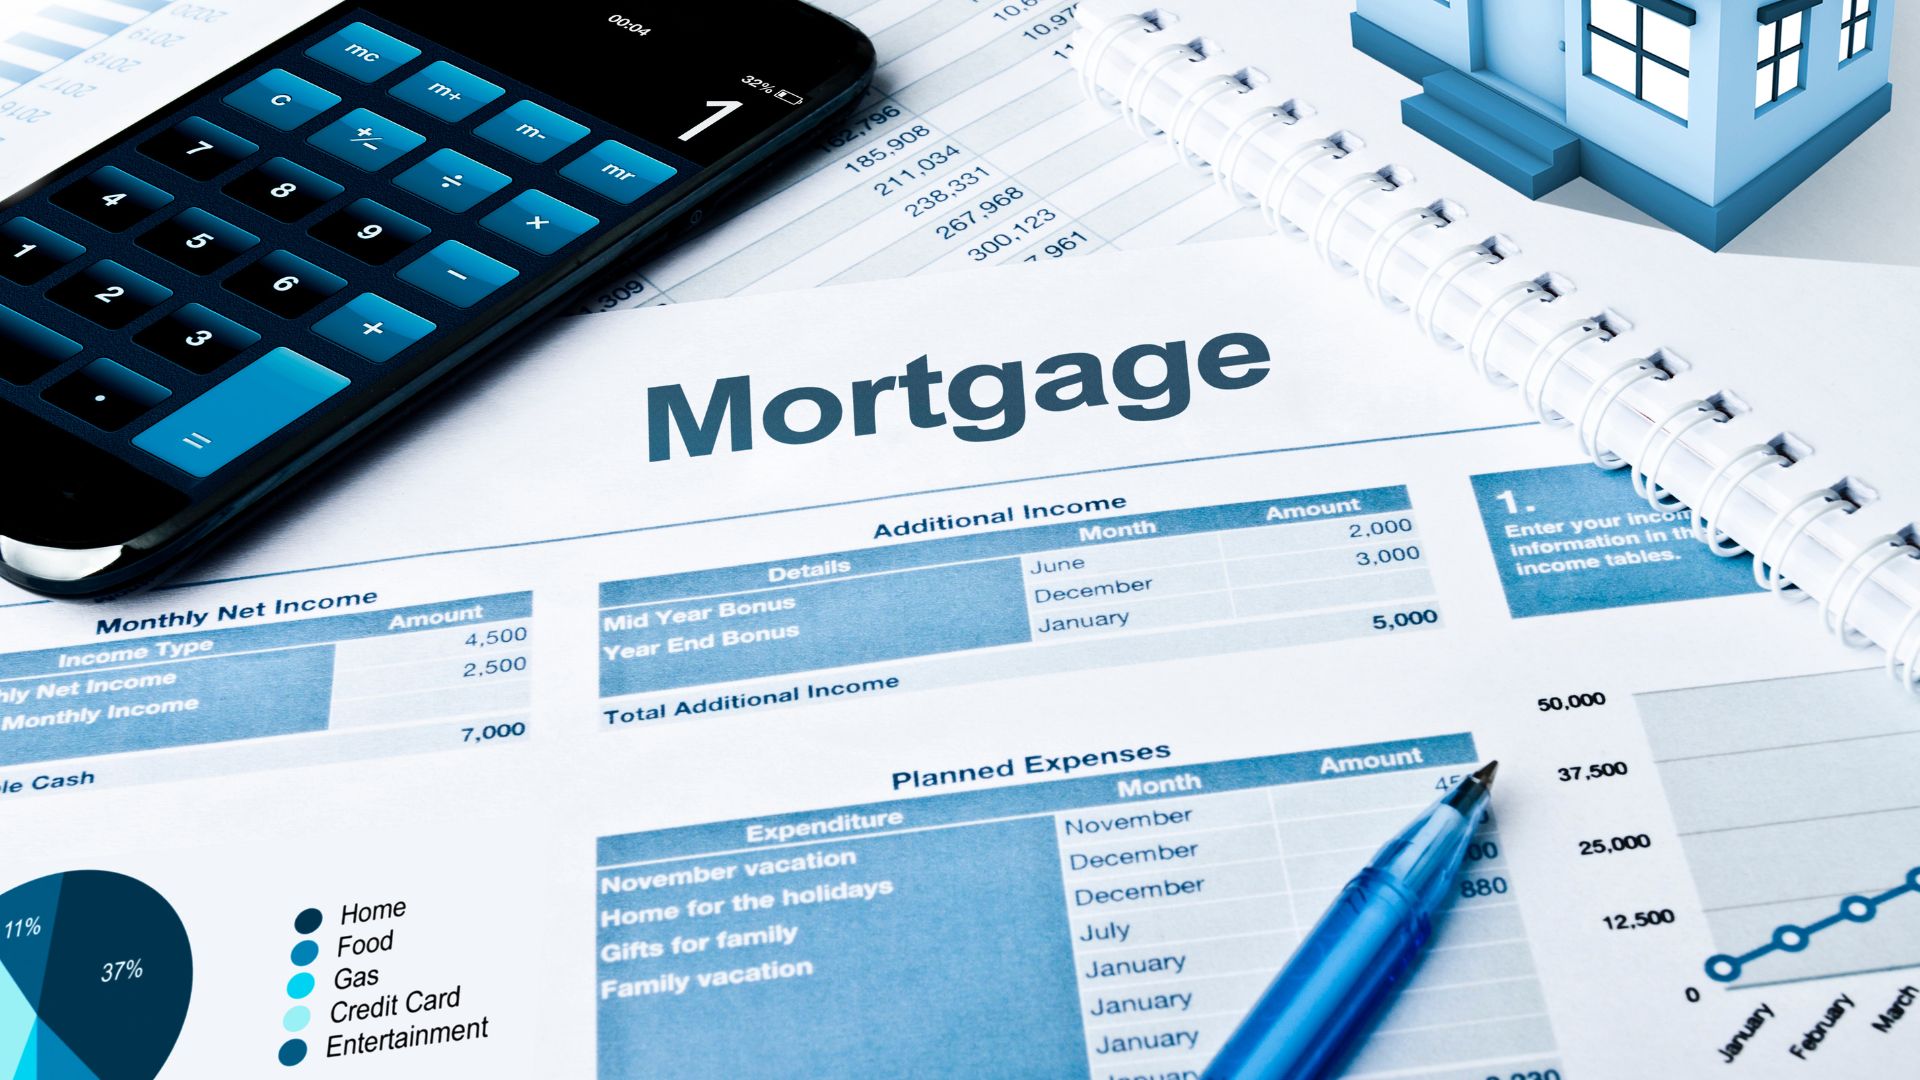 Why Home Loan Education is Essential Before Taking Out a Mortgage